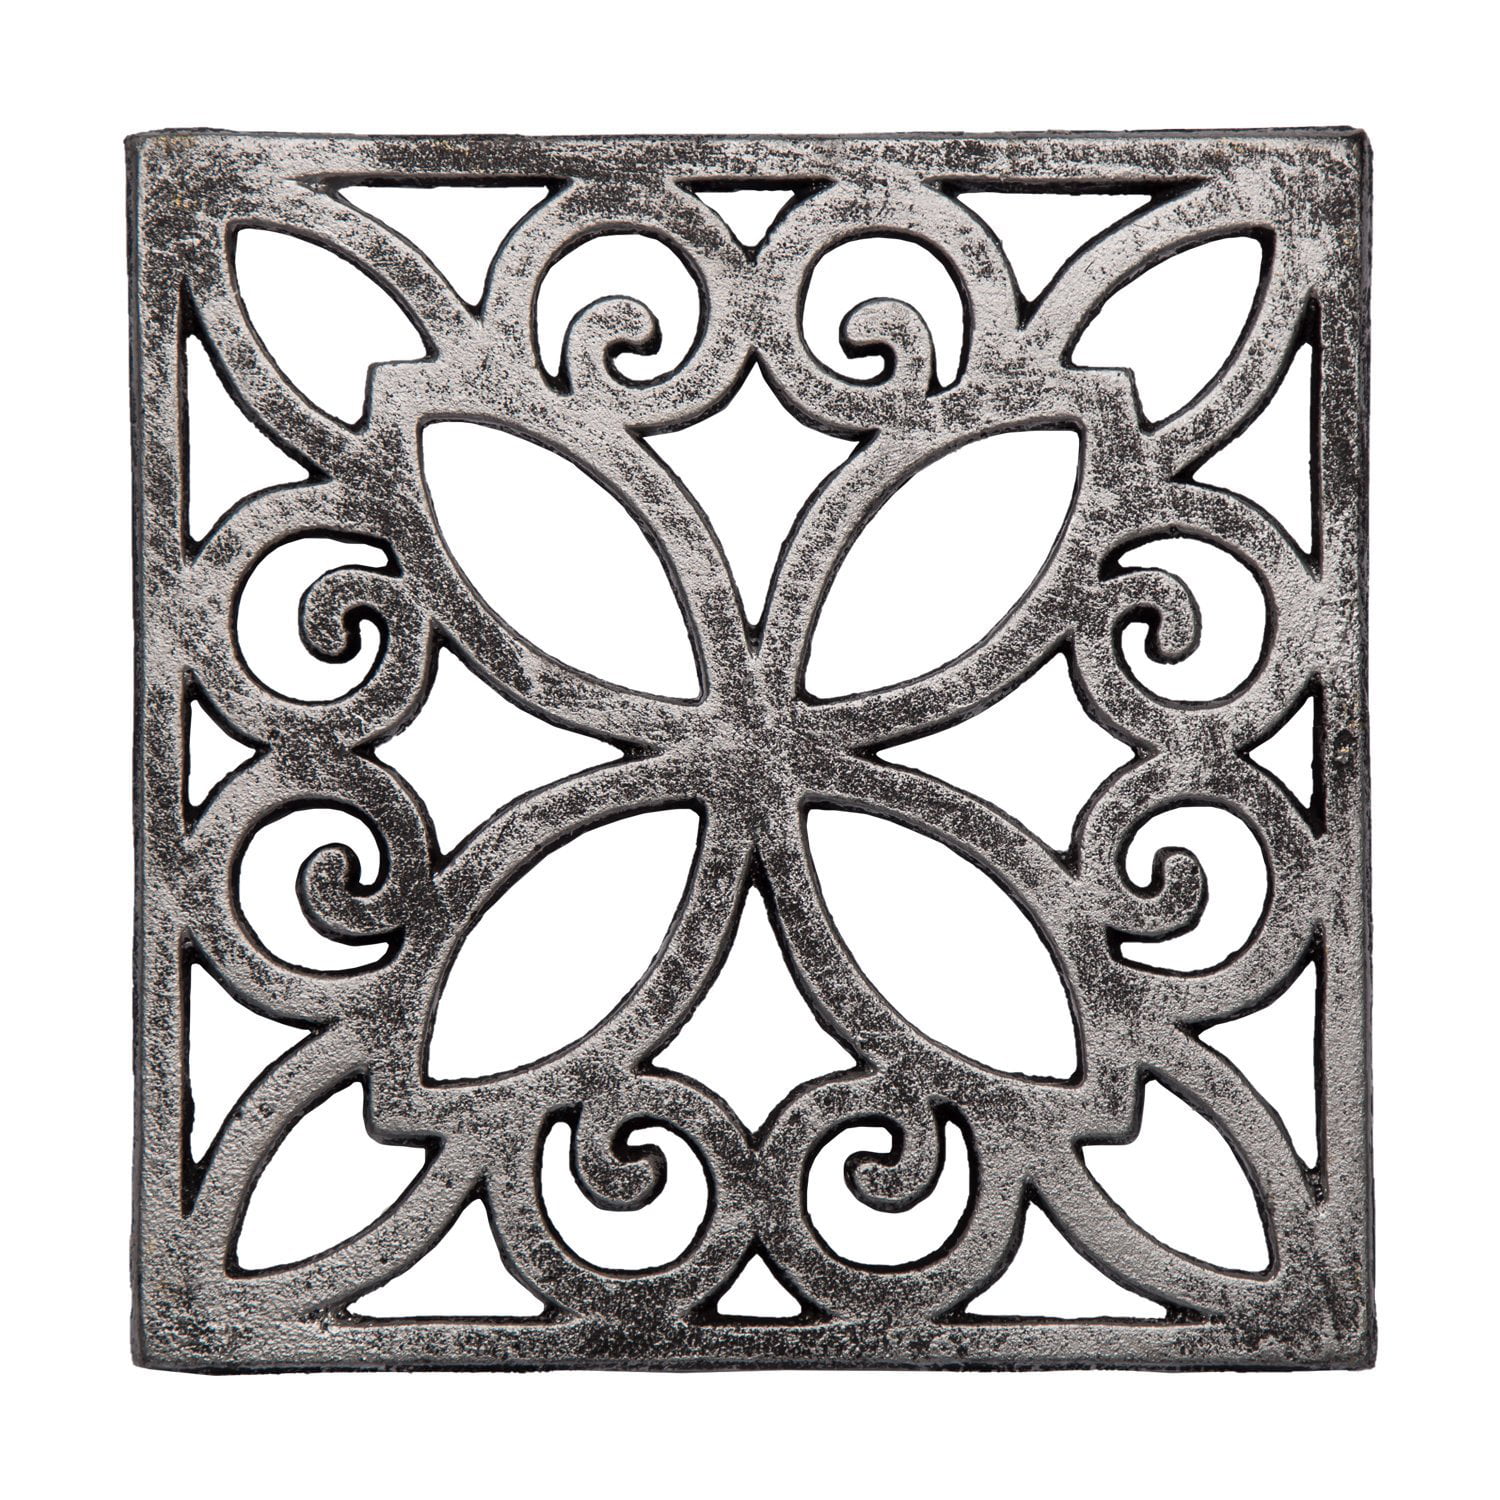 Red Cast Iron Trivet Metal Square Trivet For Kitchen Table Countertop Dining Table